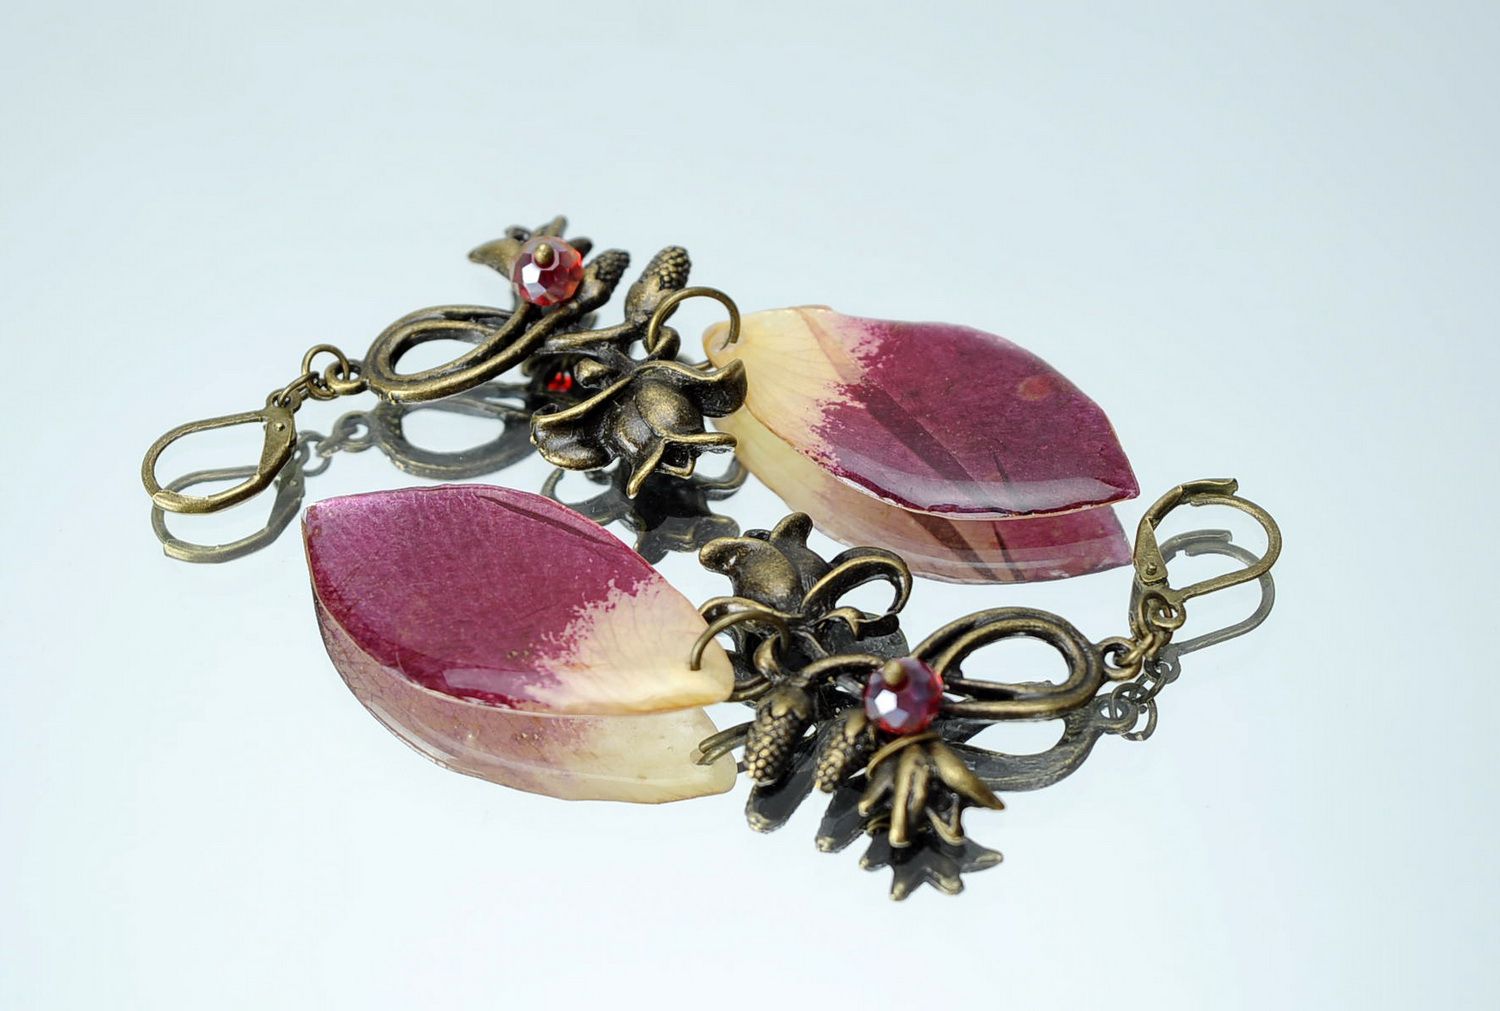 Earrings made from rose petals photo 3